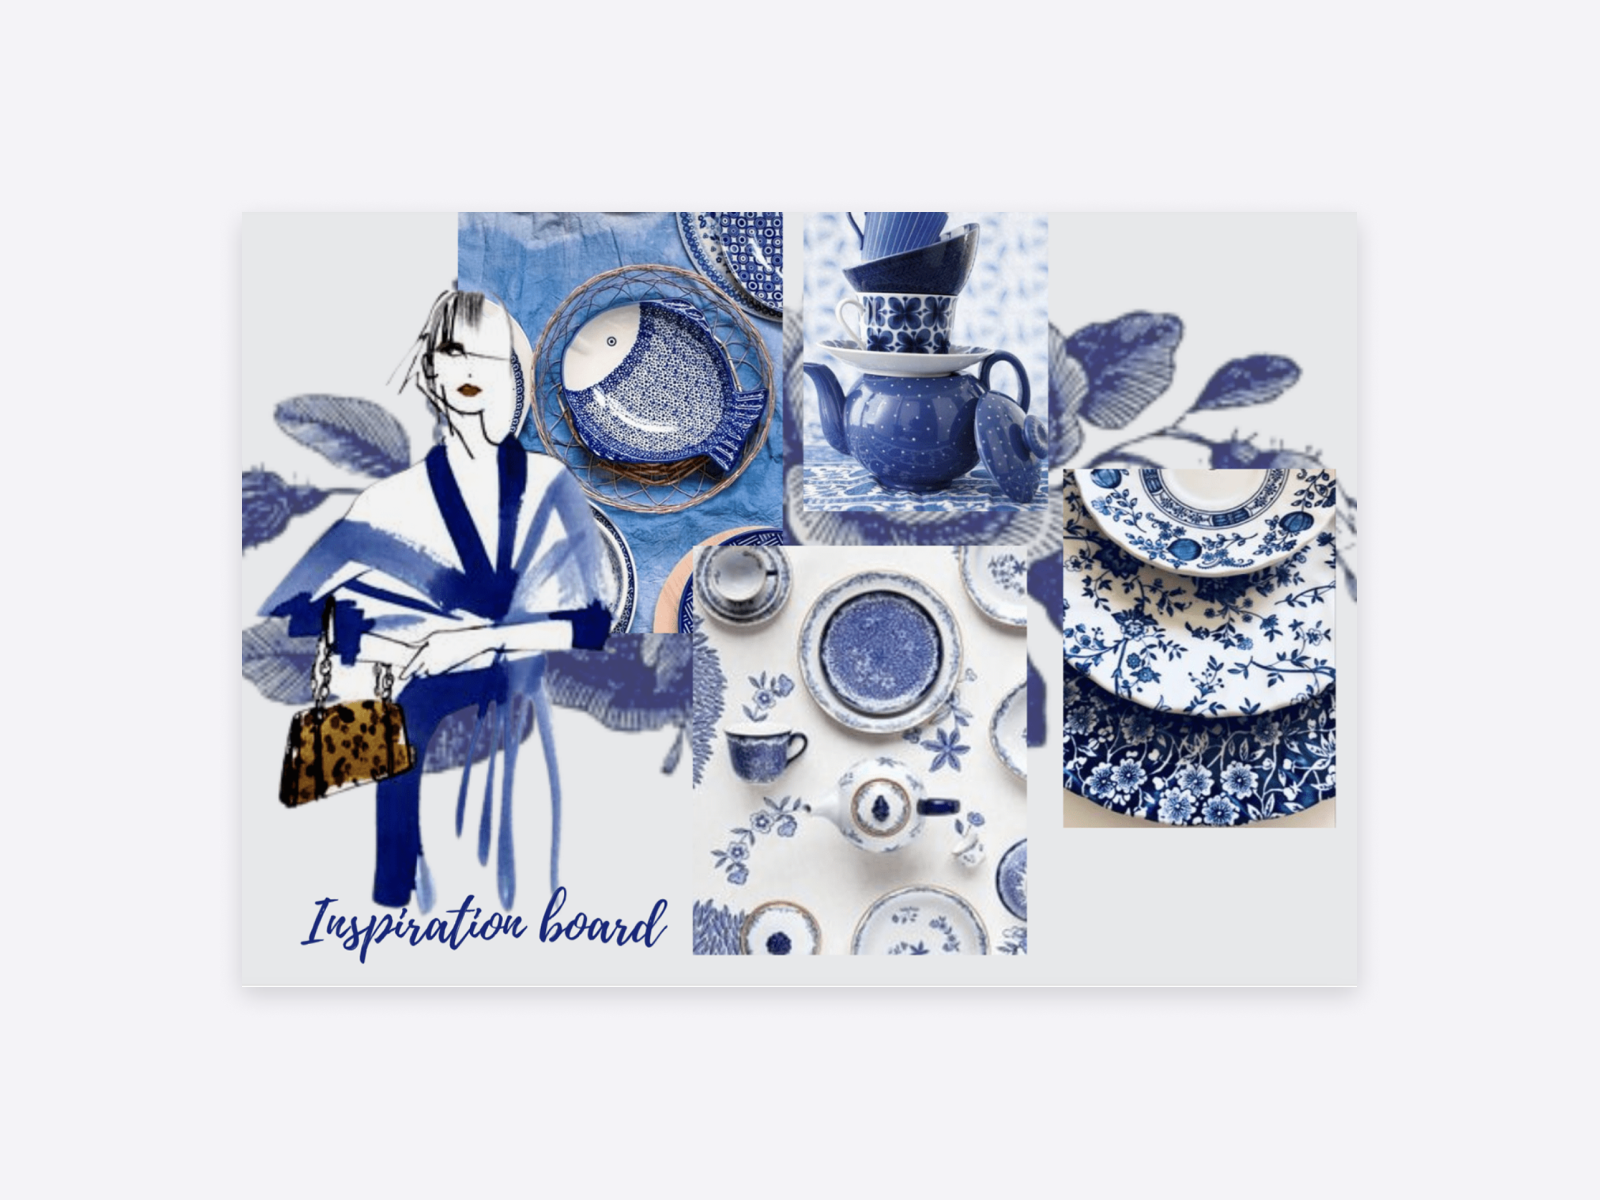 Aditi's inspiration board, with blue illustrations and details.